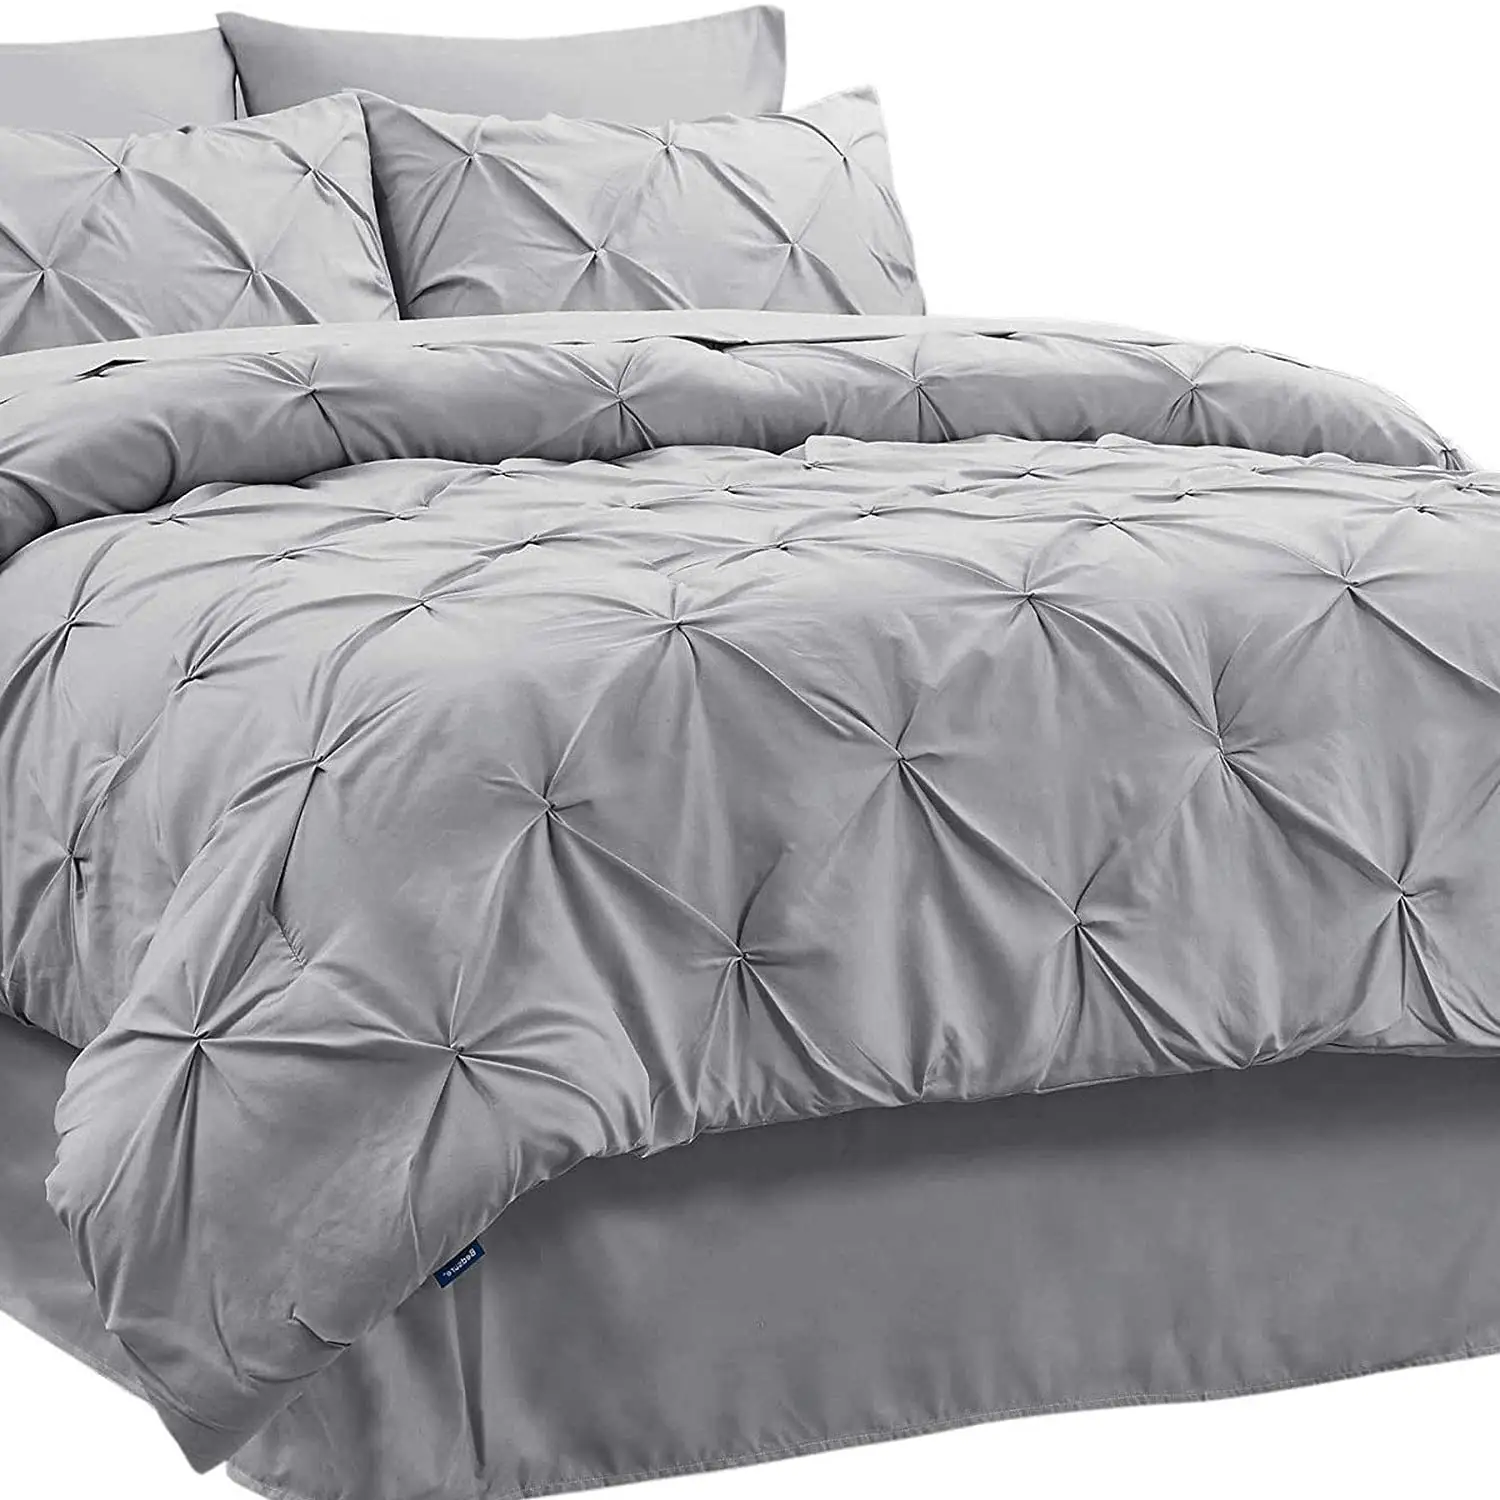 Kingworth Twin Size 8 Pieces Grey Warm Bedding Set Comforter Polyester Bedding Sets